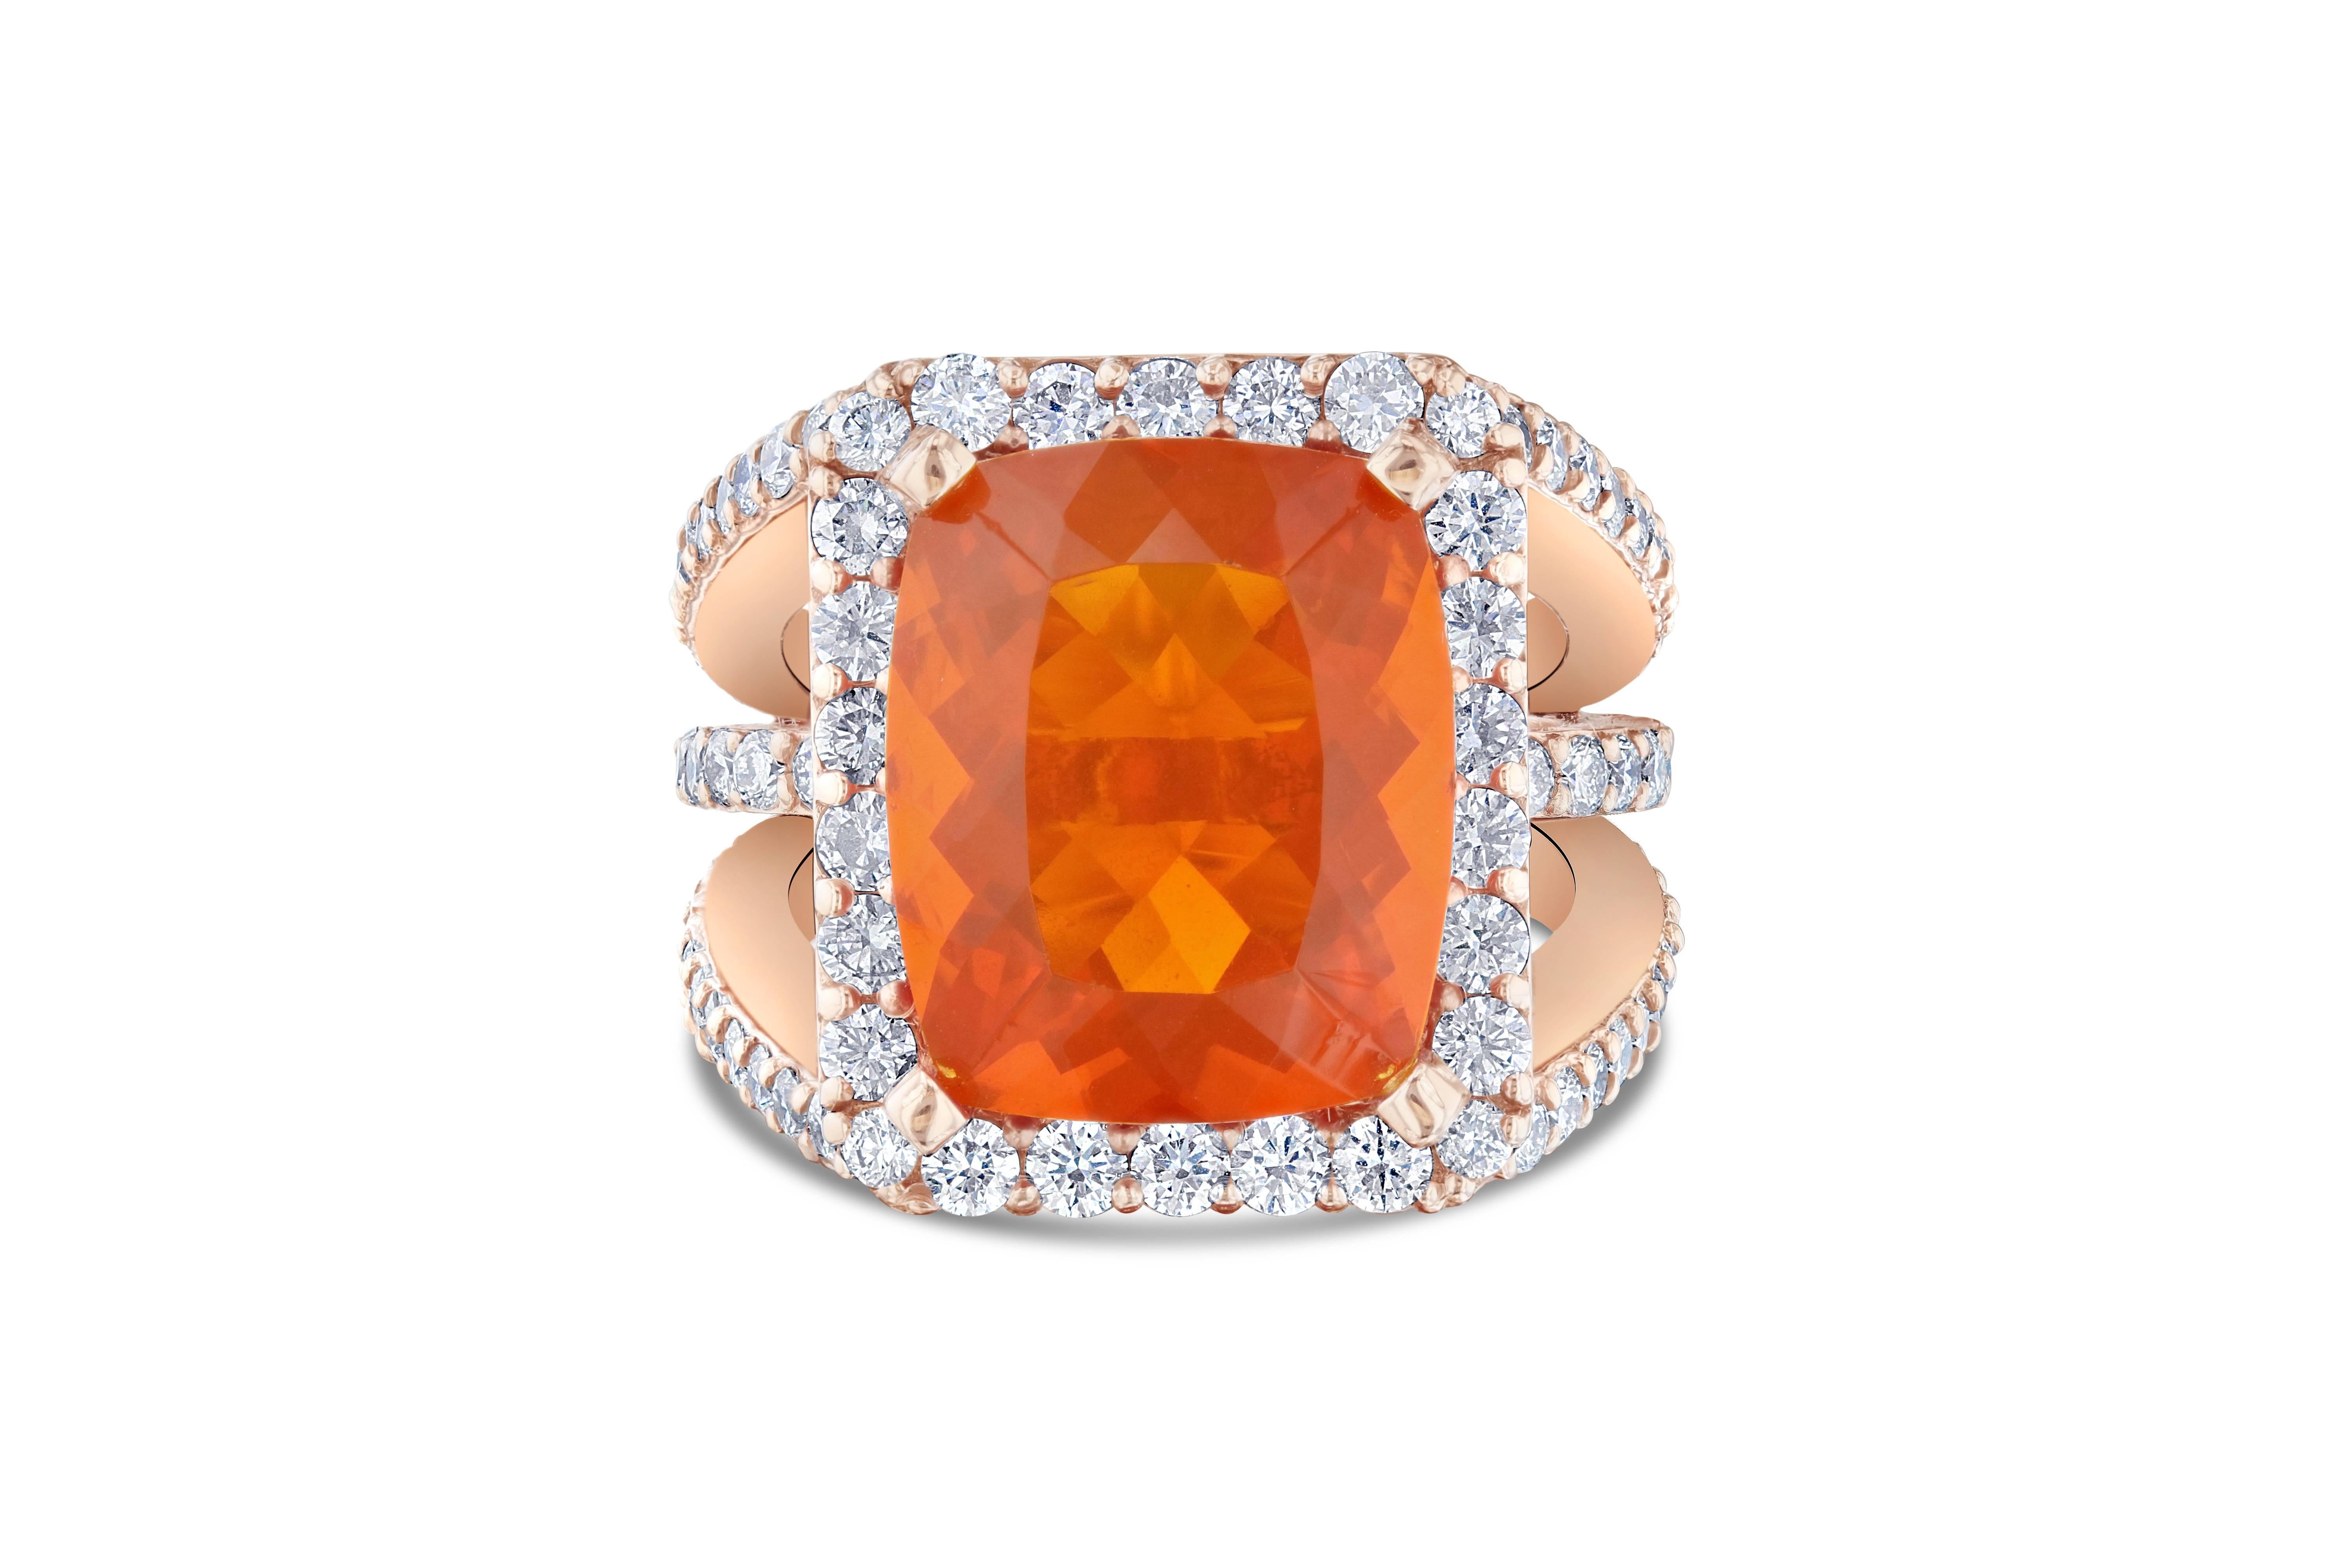 Huge Fire Opal ring for an incredible price!  This ring has a 7.42 carat Fire Opal in the center of the ring and is surrounded by 92 Round Brilliant Cut Diamonds that weigh a total of 2.30 carat.   The total carat weight of the ring is 9.72